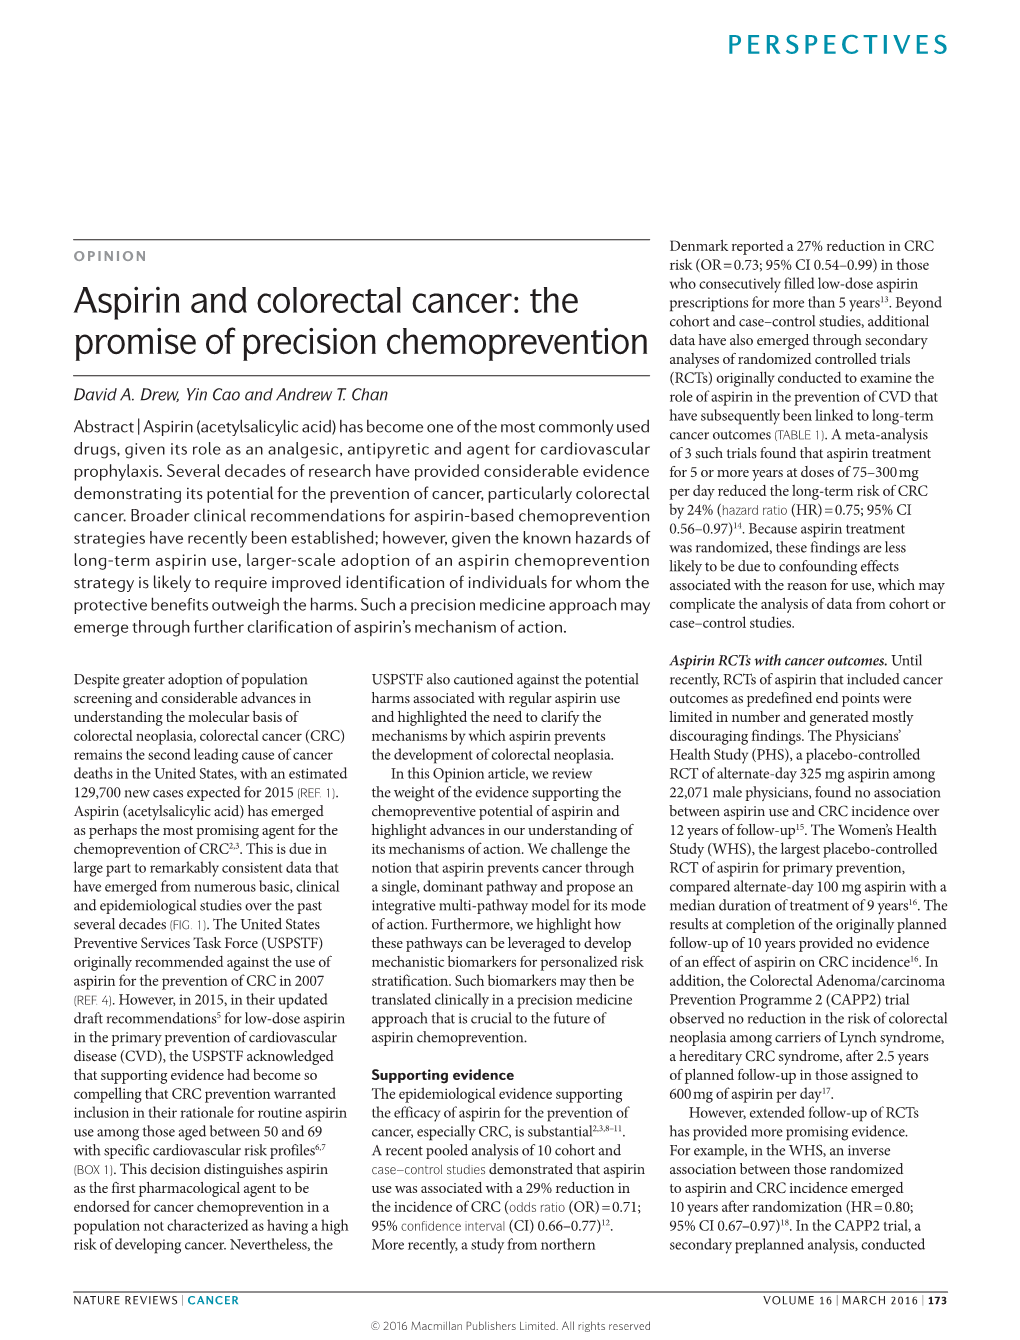 Aspirin and Colorectal Cancer: the Promise of Precision Chemoprevention